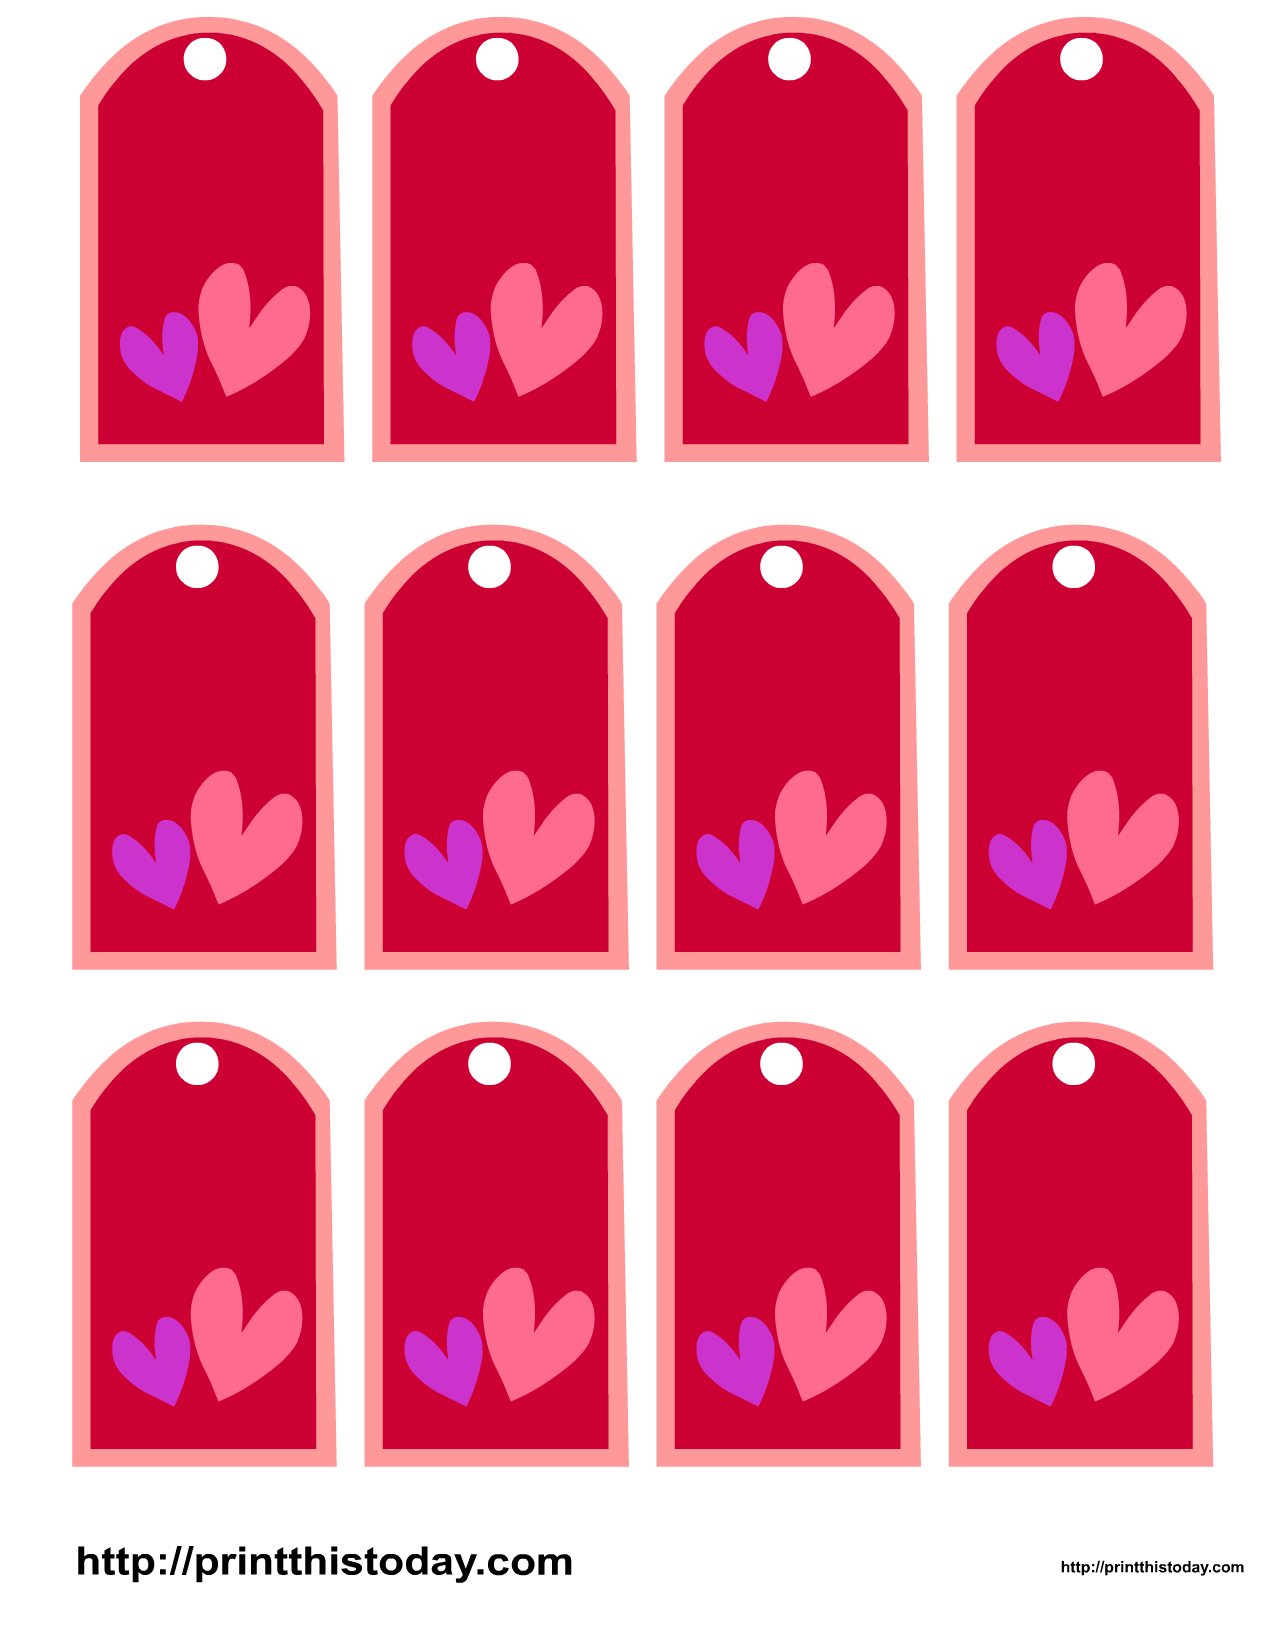 Favor Tags featuring Hearts